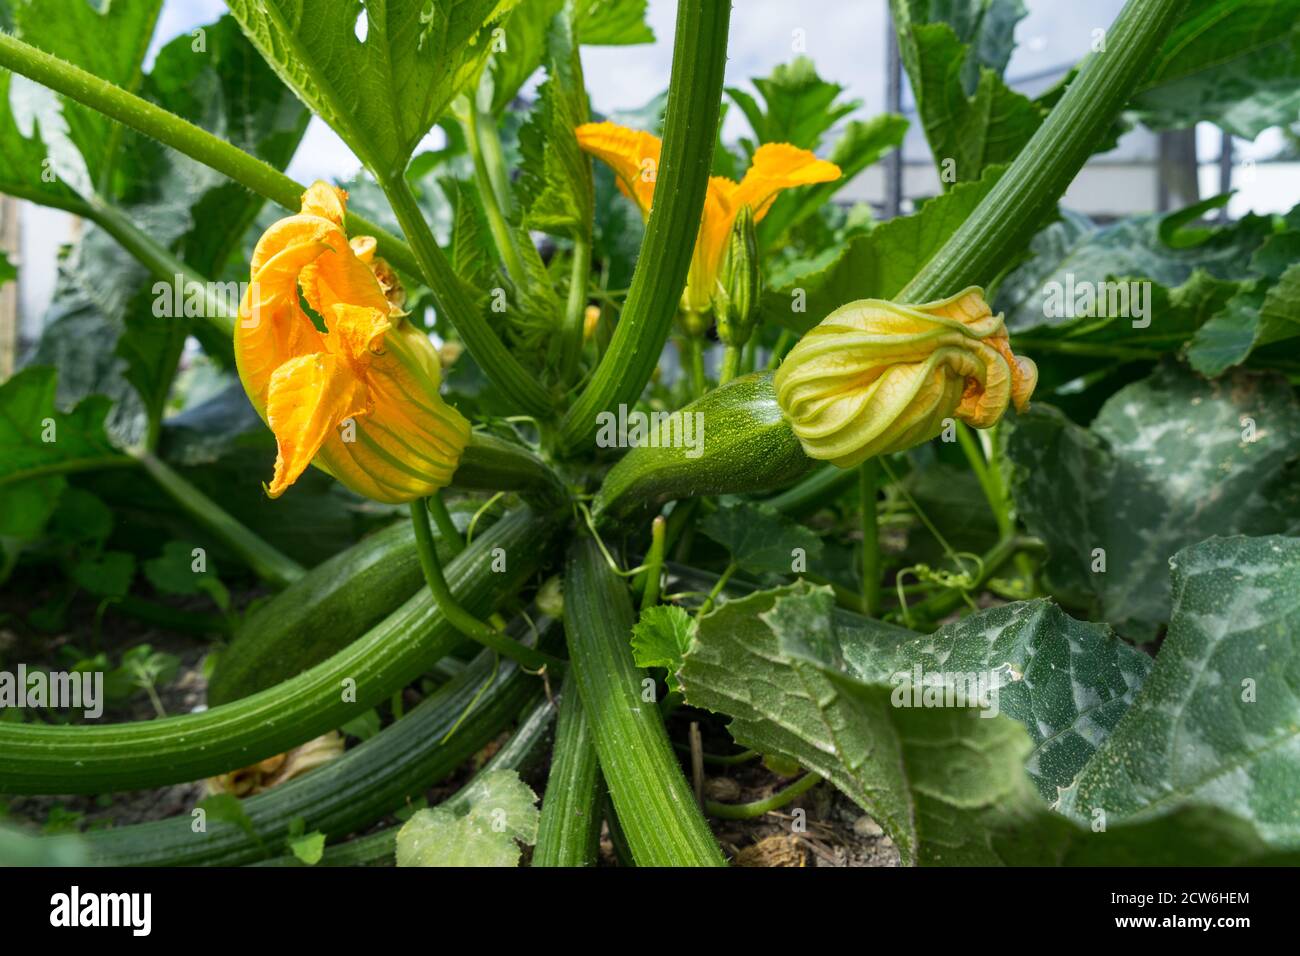 A Zucchini plant. Zucchini flower. Green vegetable marrow growing on bush in a vegetable garden Stock Photo